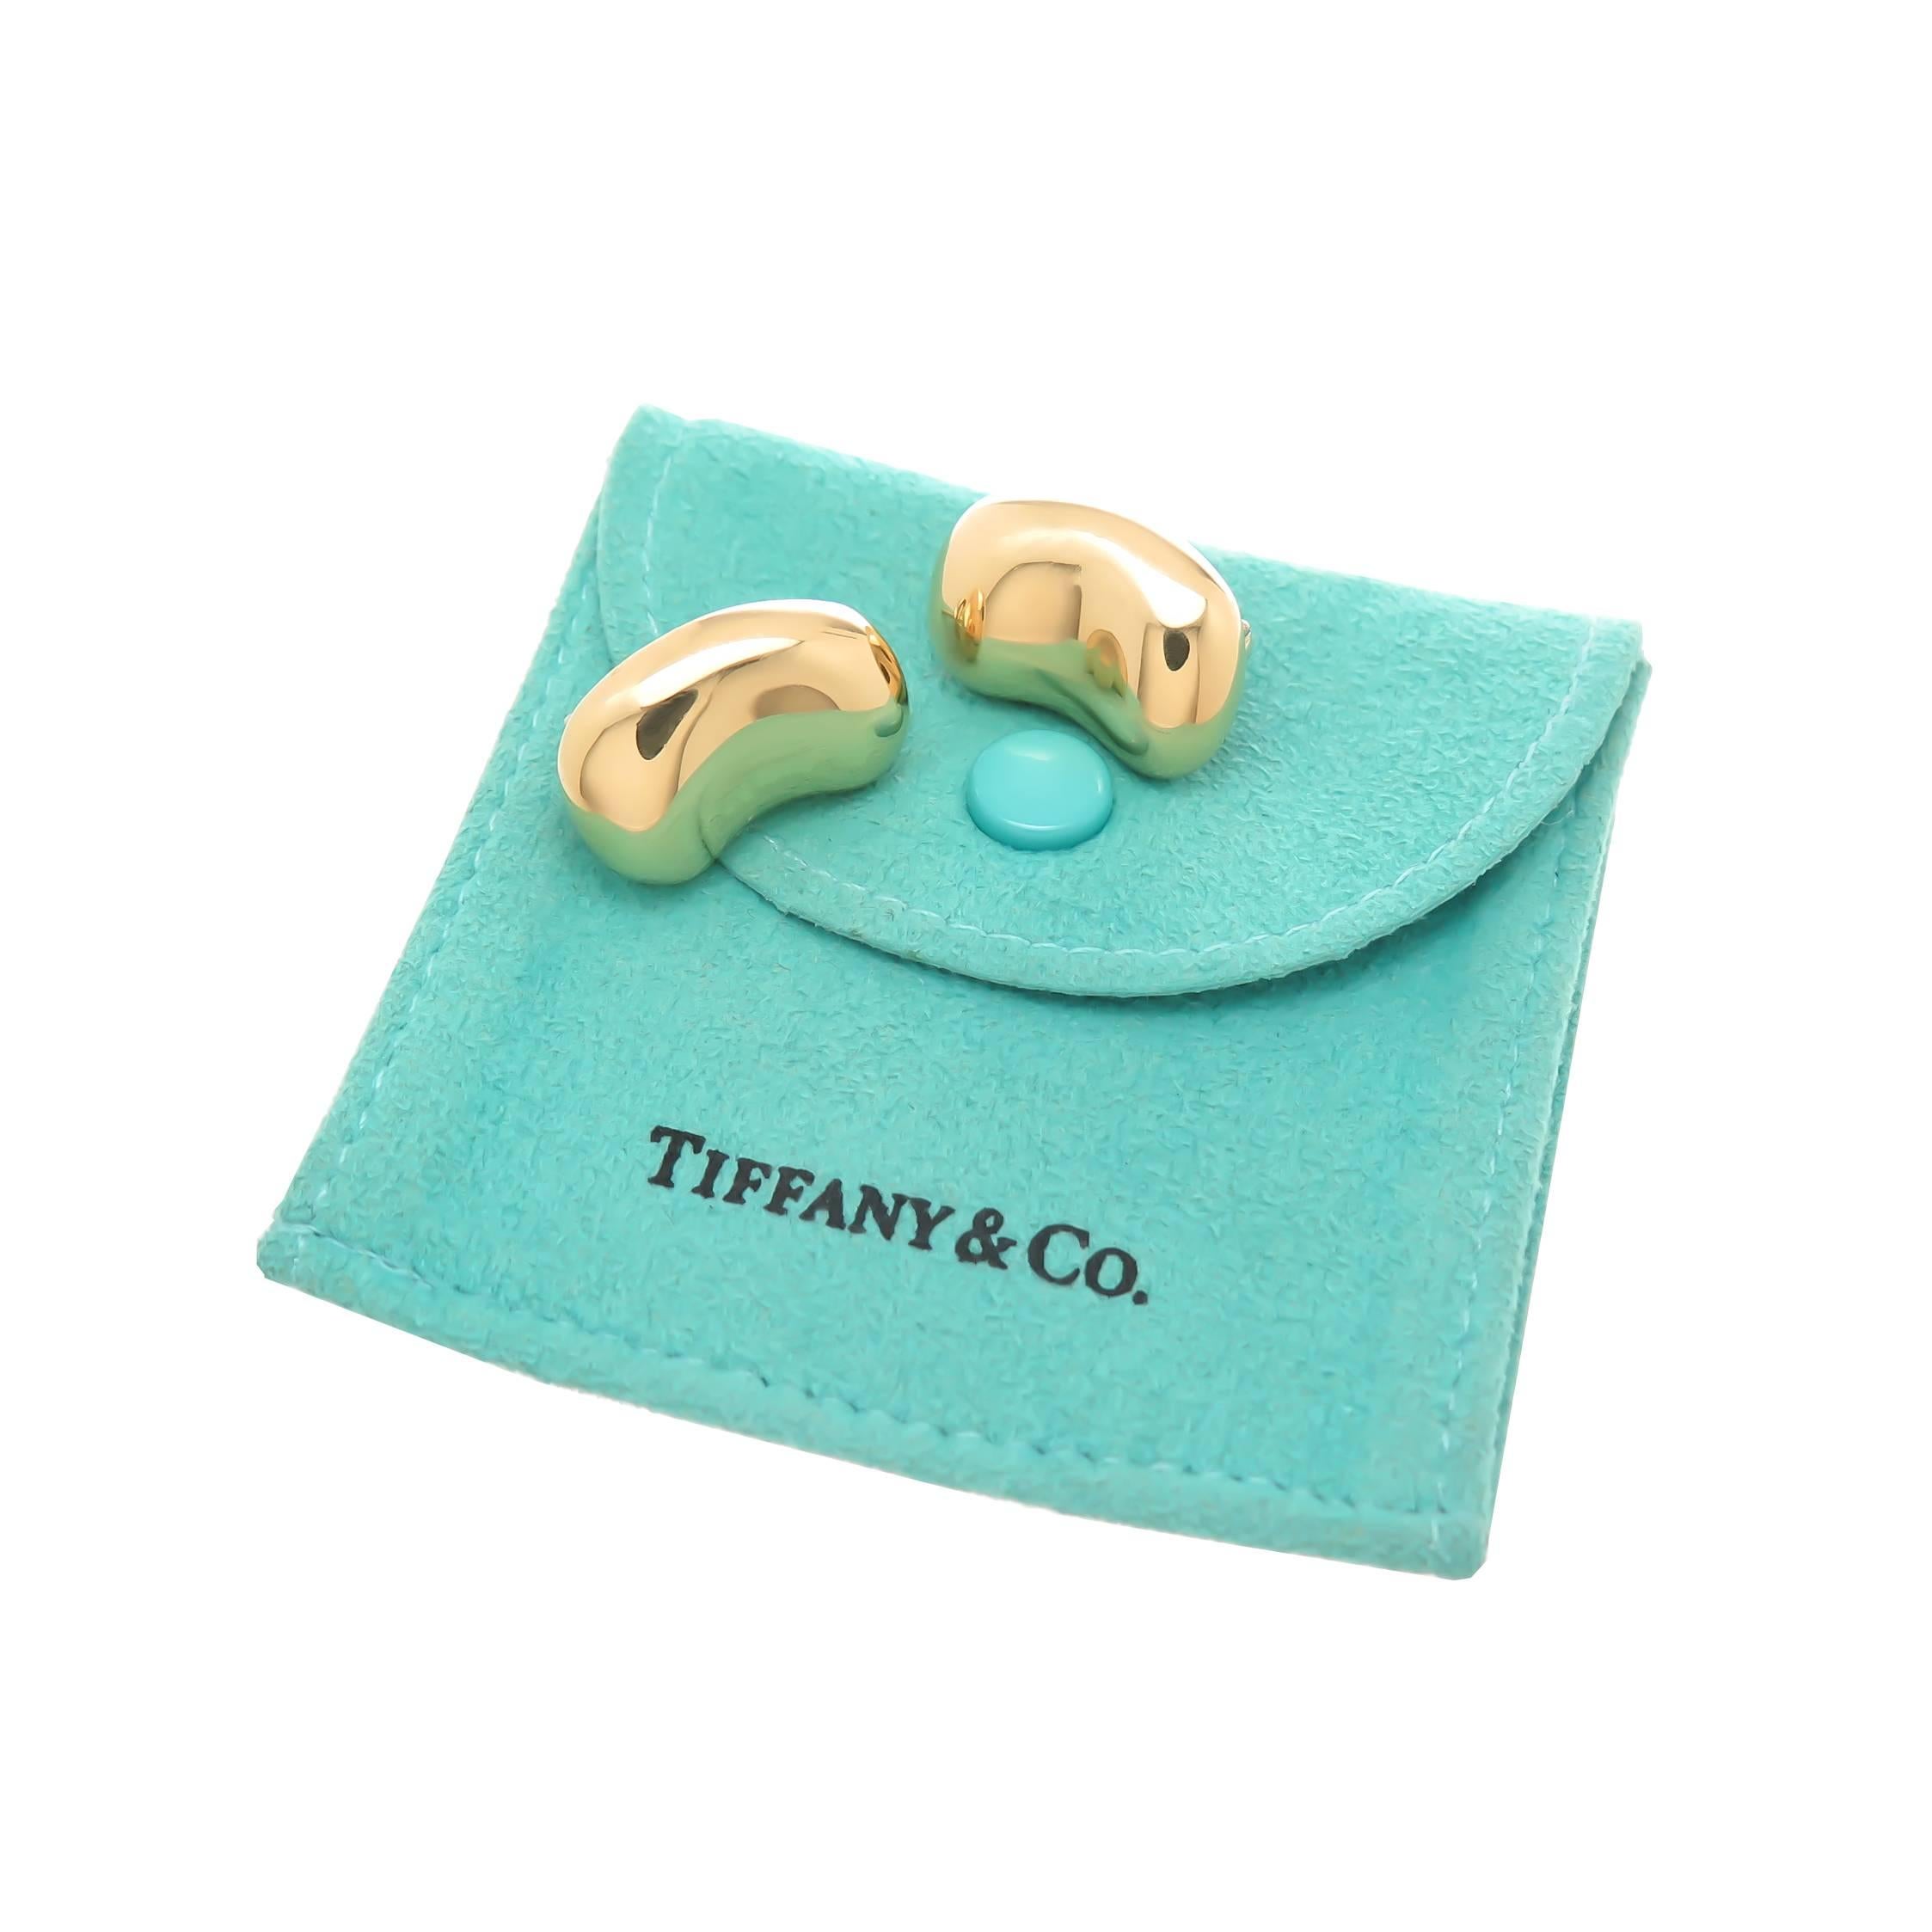 Circa 1990 Elsa Peretti for Tiffany & Company 18K Yellow Gold Classic Bean Earrings, measuring 3/4 inch in length and 1/2 inch wide and weighing 14.5 grams. Omega clip backs with a post. Accompanied by a Tiffany Suede Gift Pouch